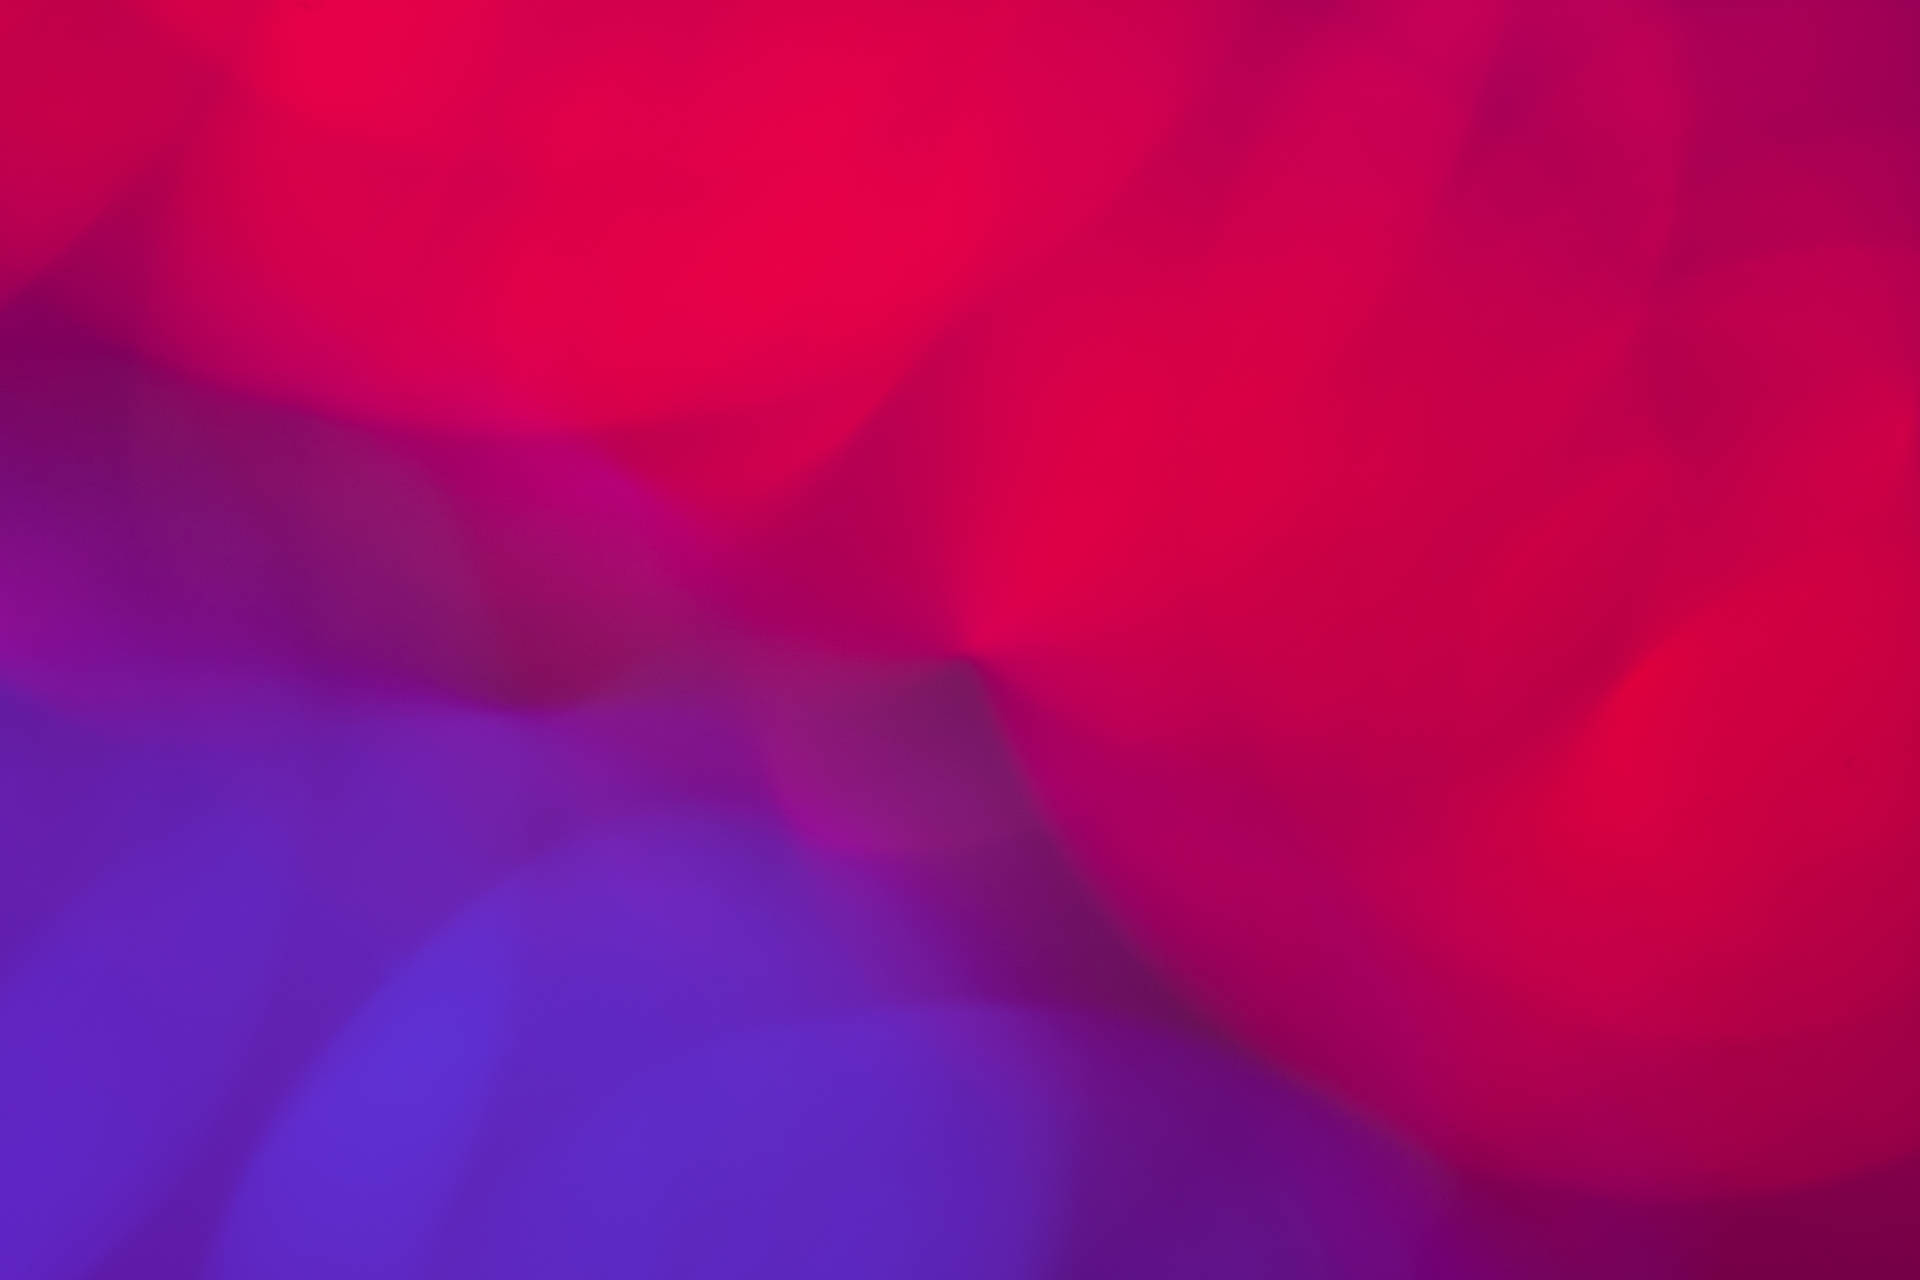 Light Purple And Red Blur Painting Background